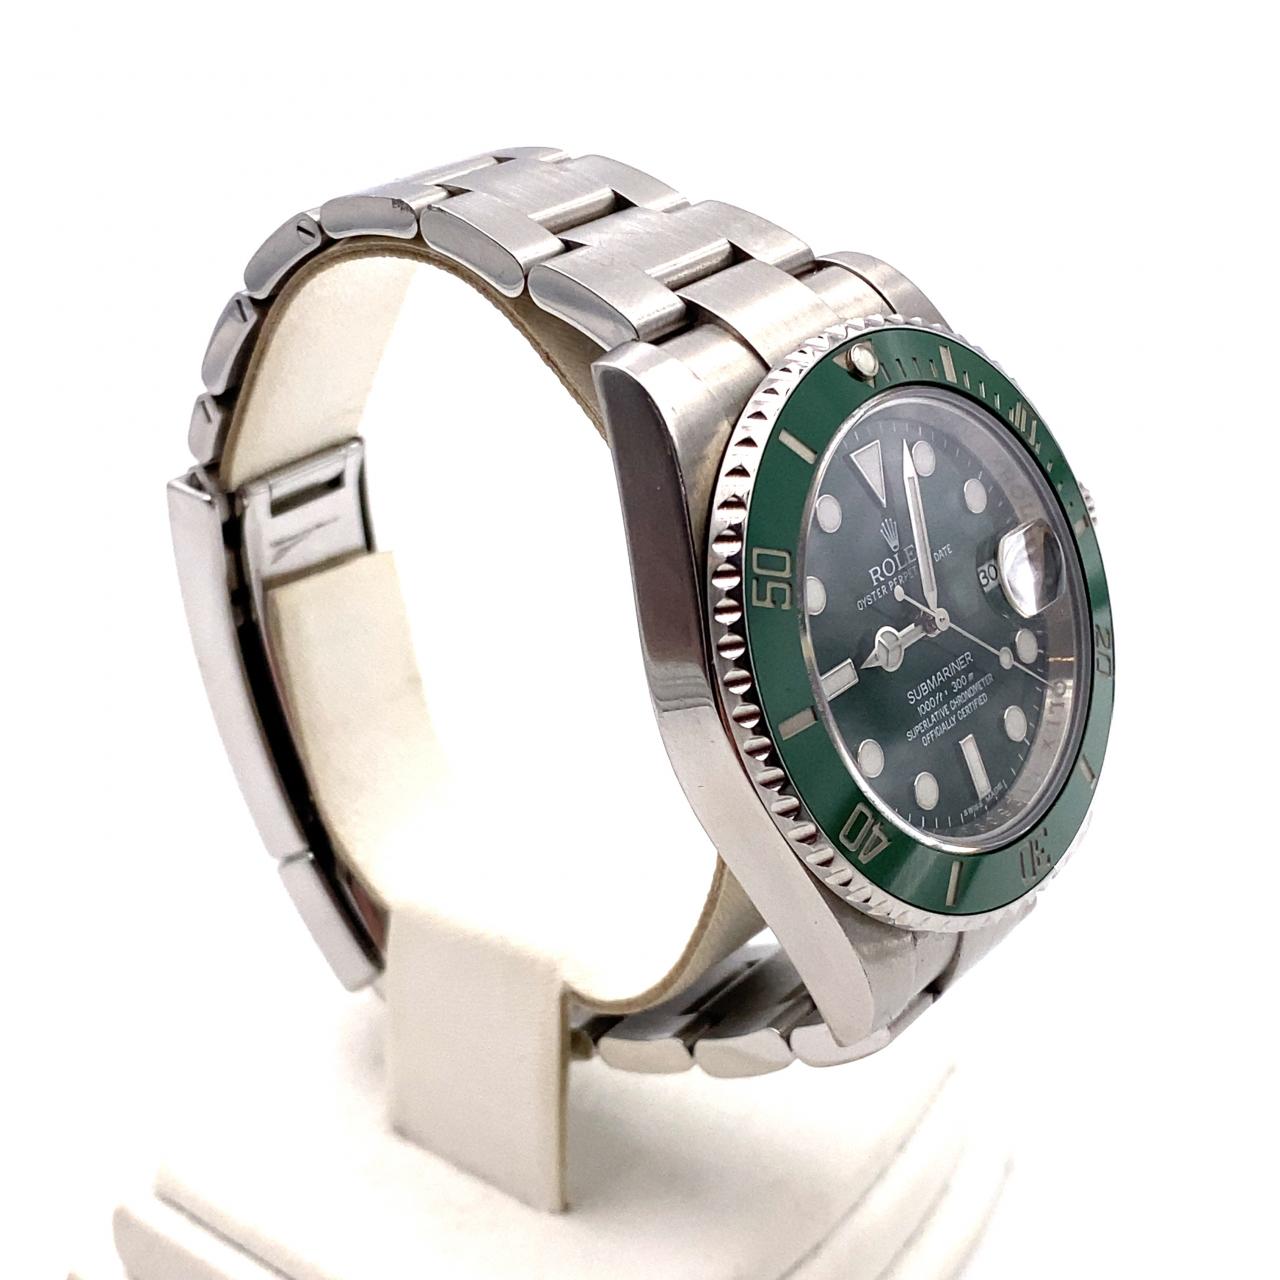 Pre-owned Rolex Submariner Watch | 116610LV | Fct Credit/Debit Card